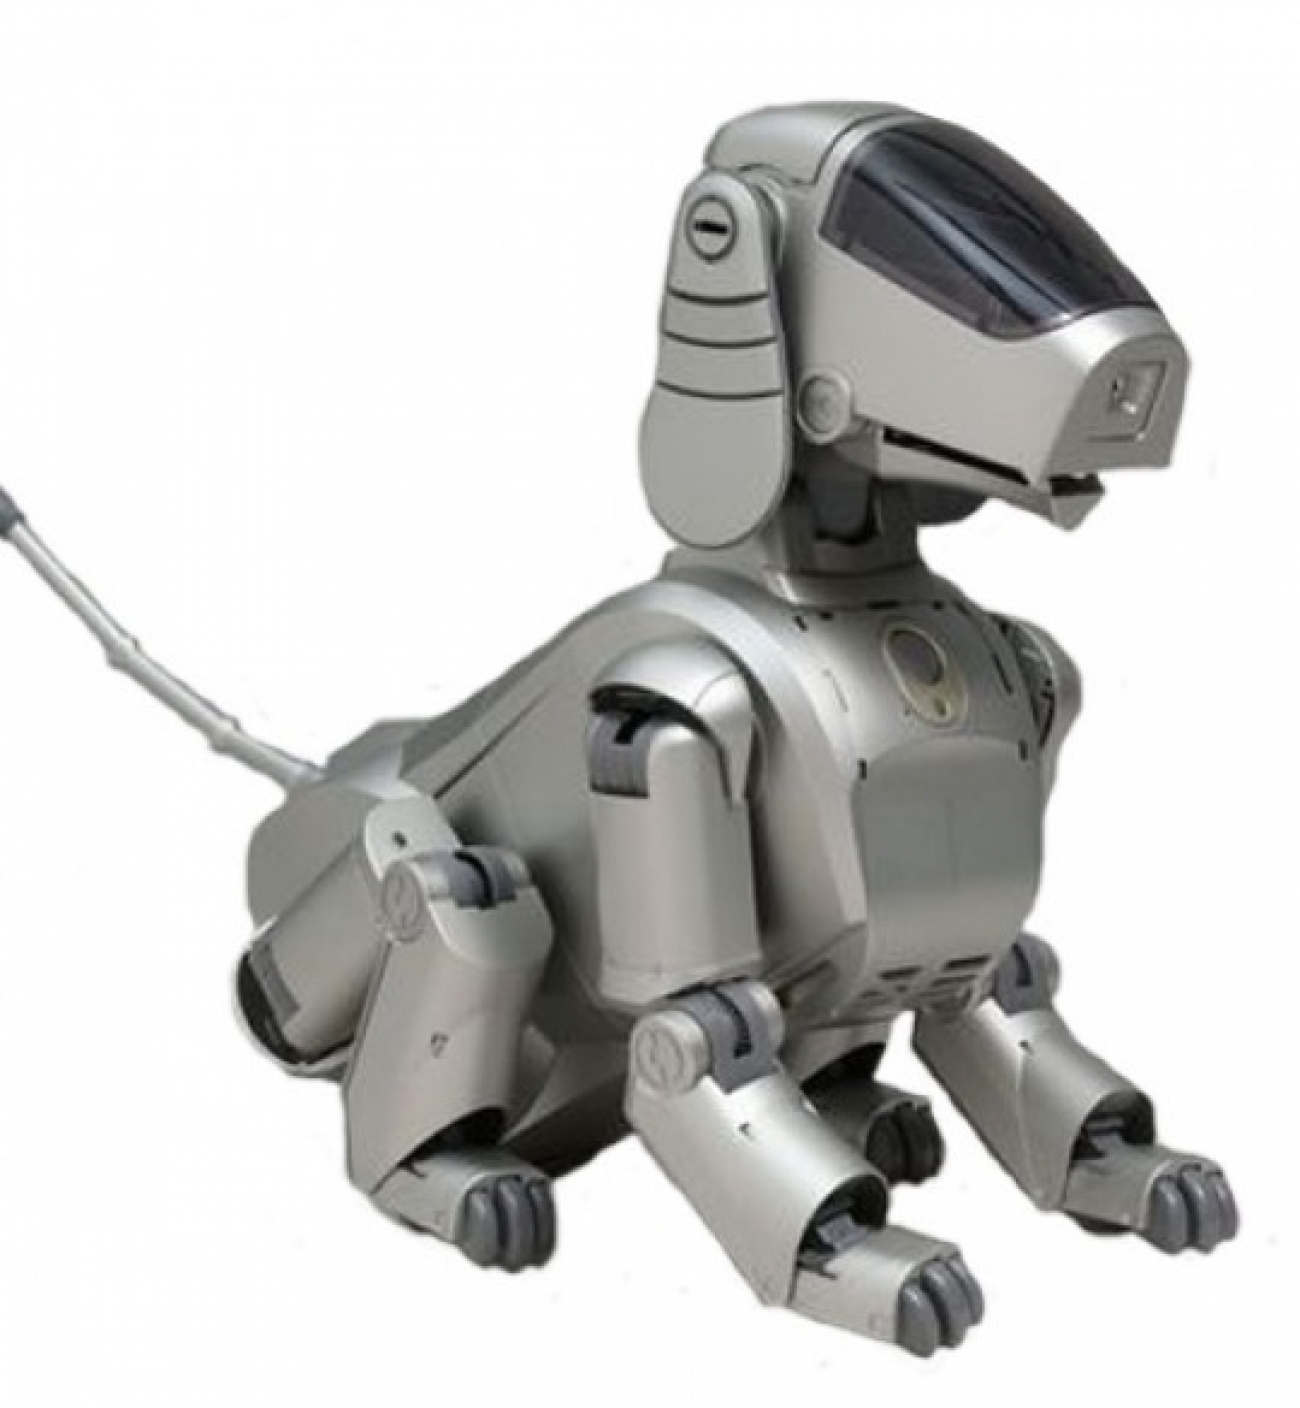 The Sony Aibo ERS-110